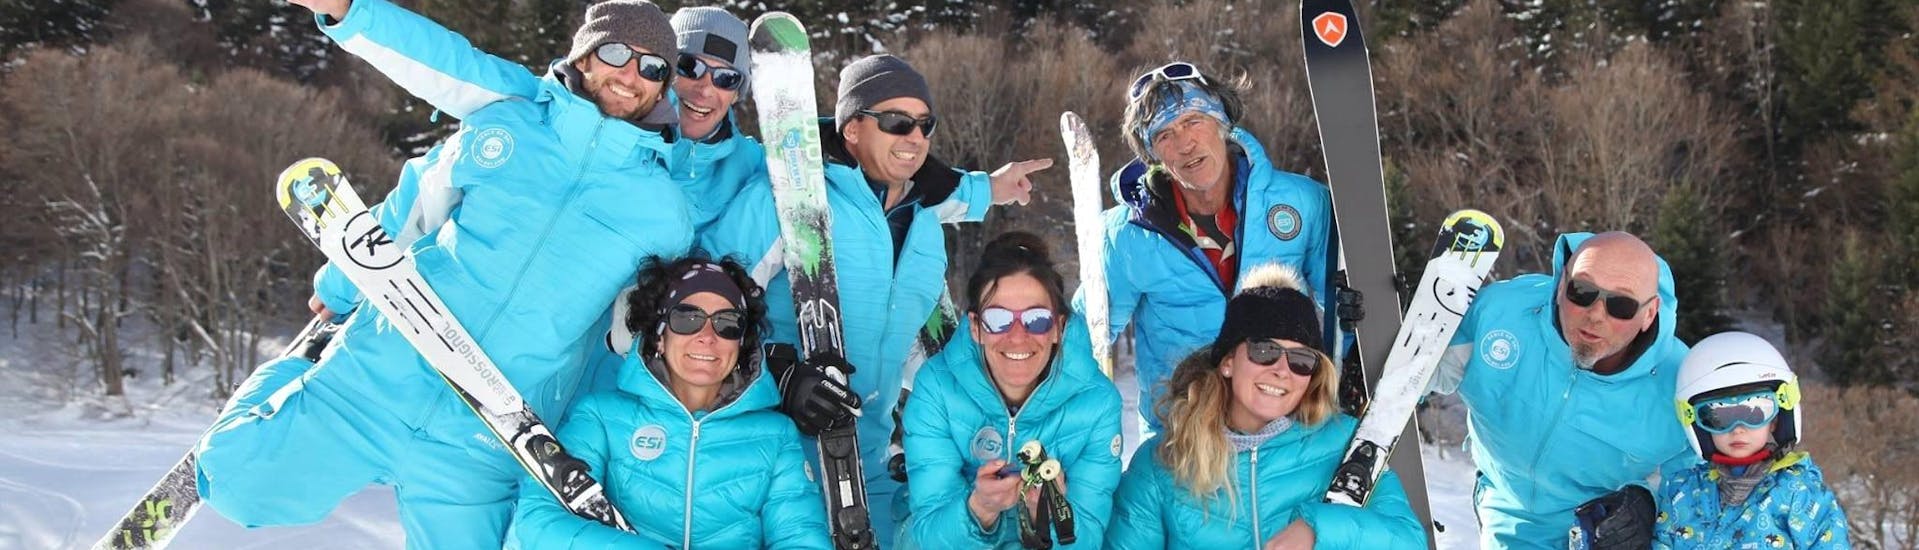 Picture of the team of ski instructors from the ski school ESI Ecoloski Barèges who are teaching ski lessons in Le Grand Tourmalet ski area.